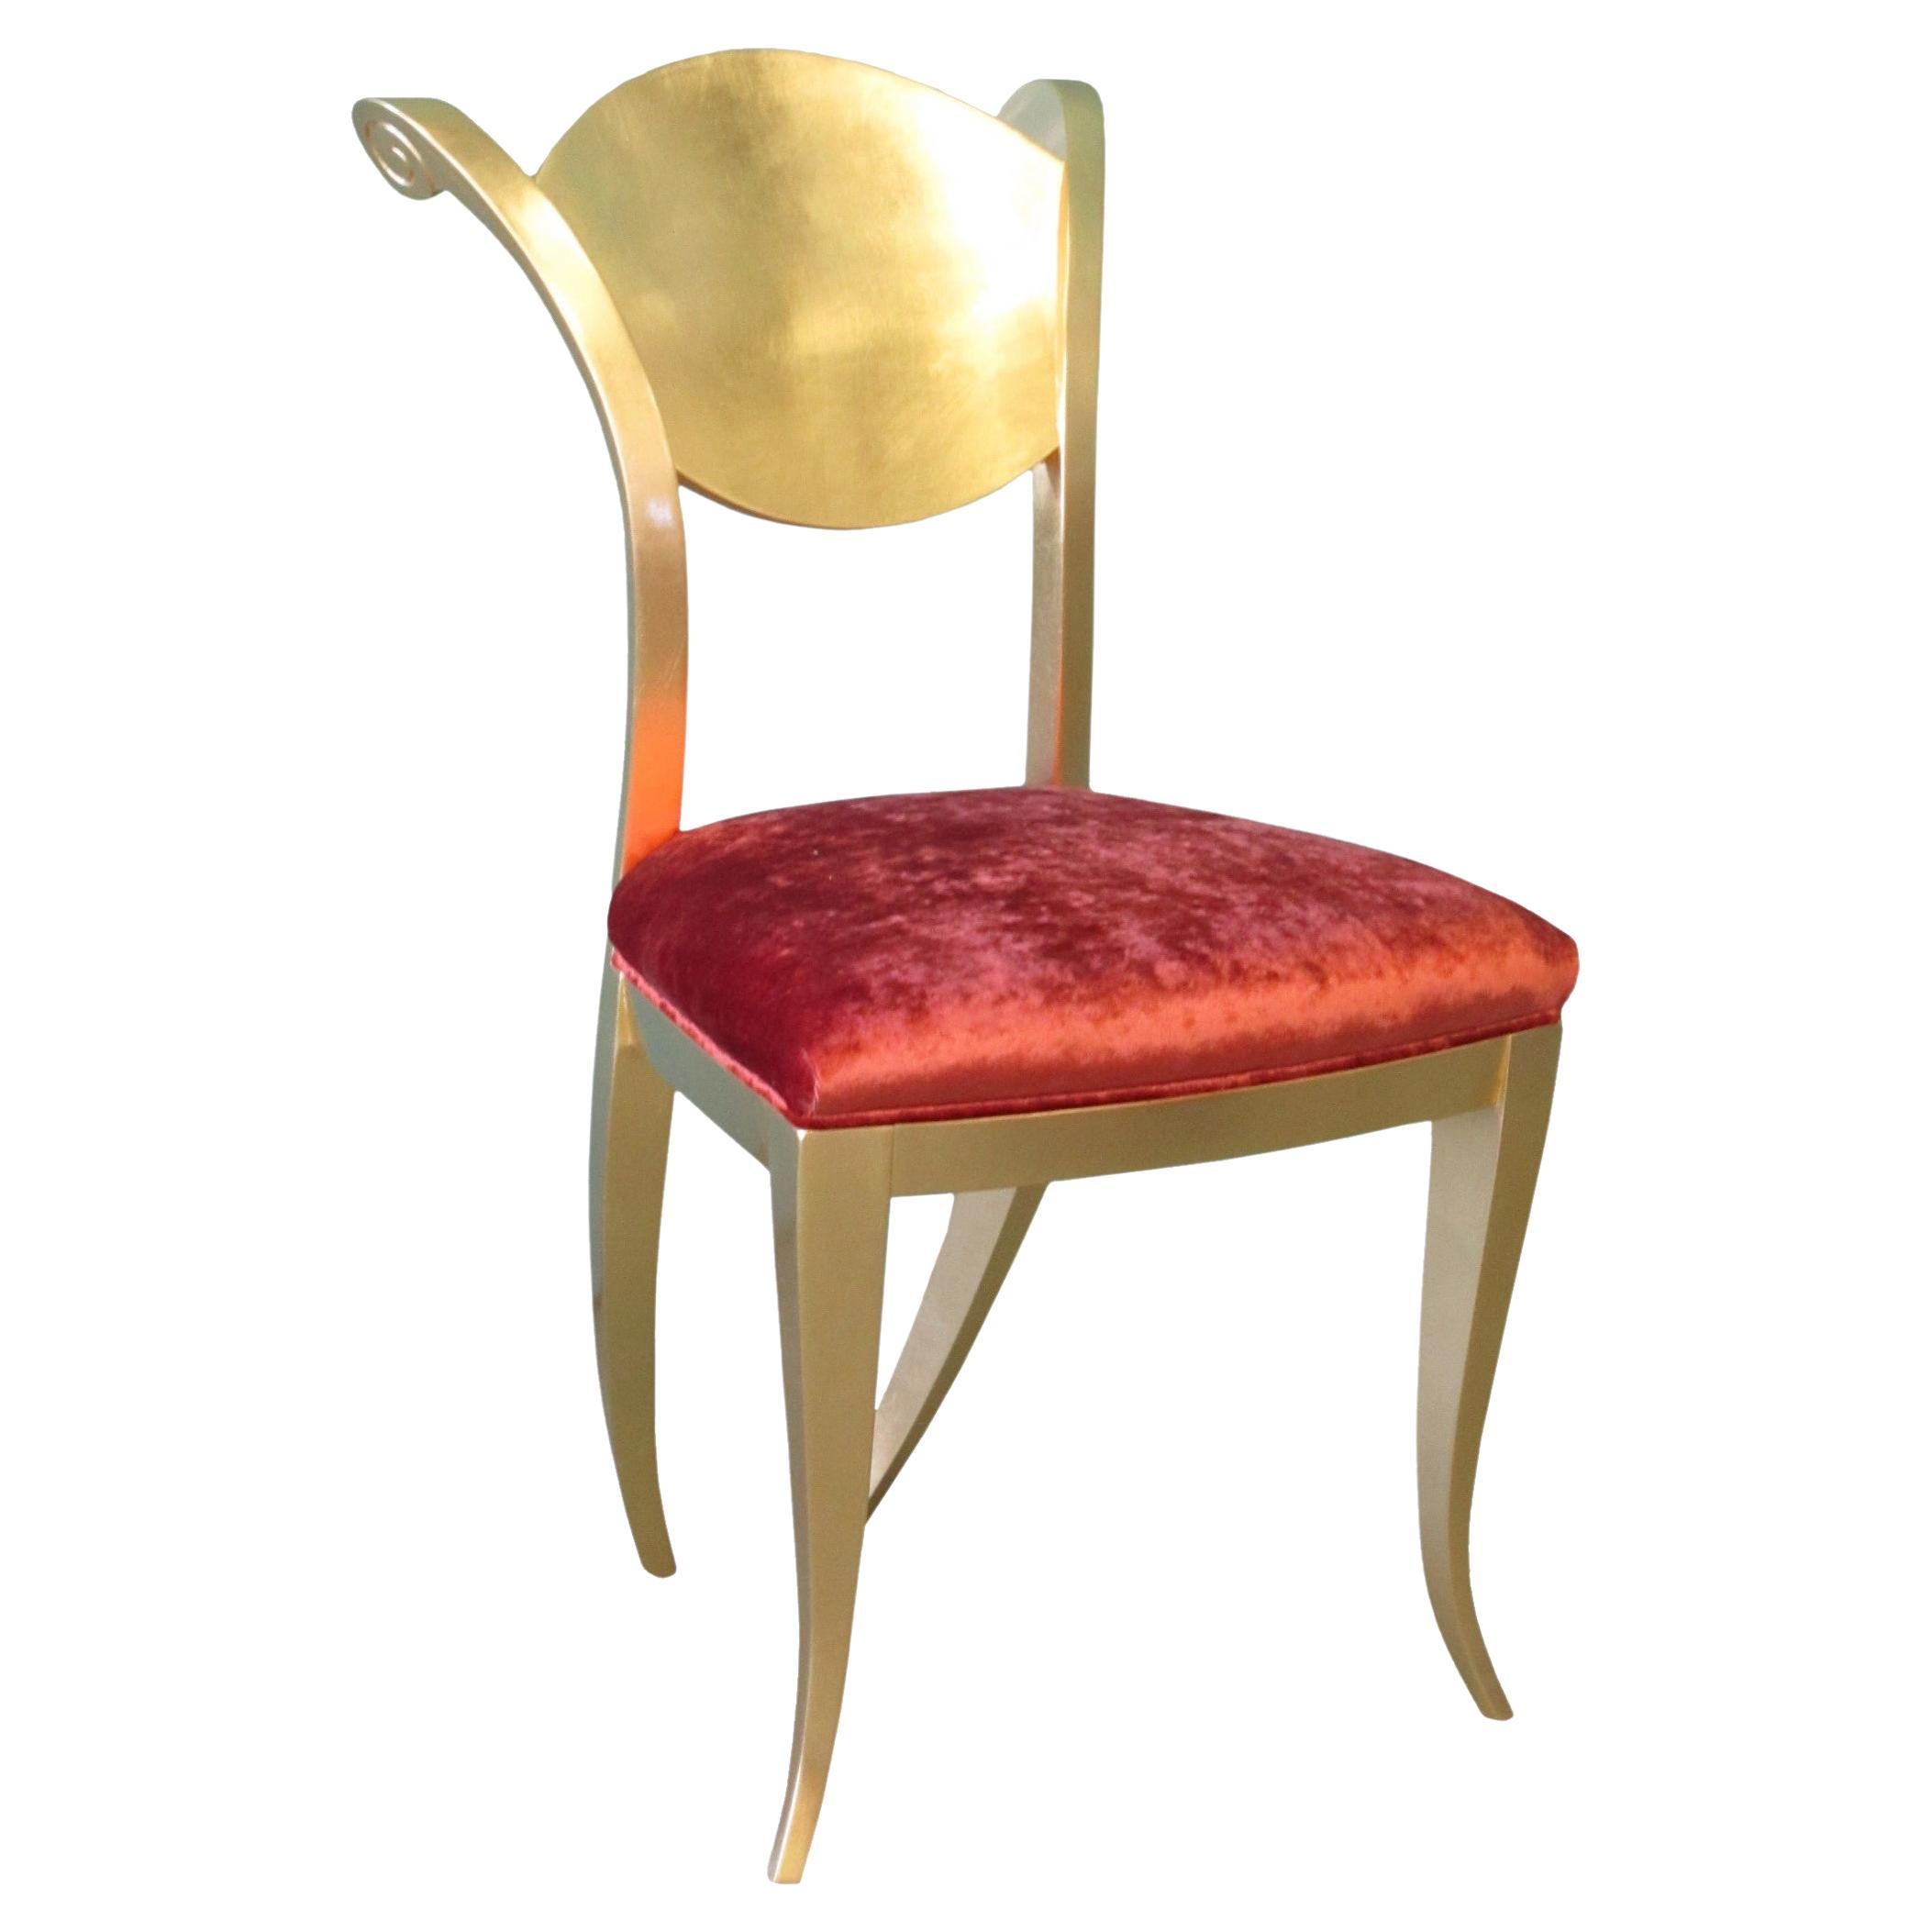 Angel's chair in Solid Wood Gold Leaf Finish and Padded Seat